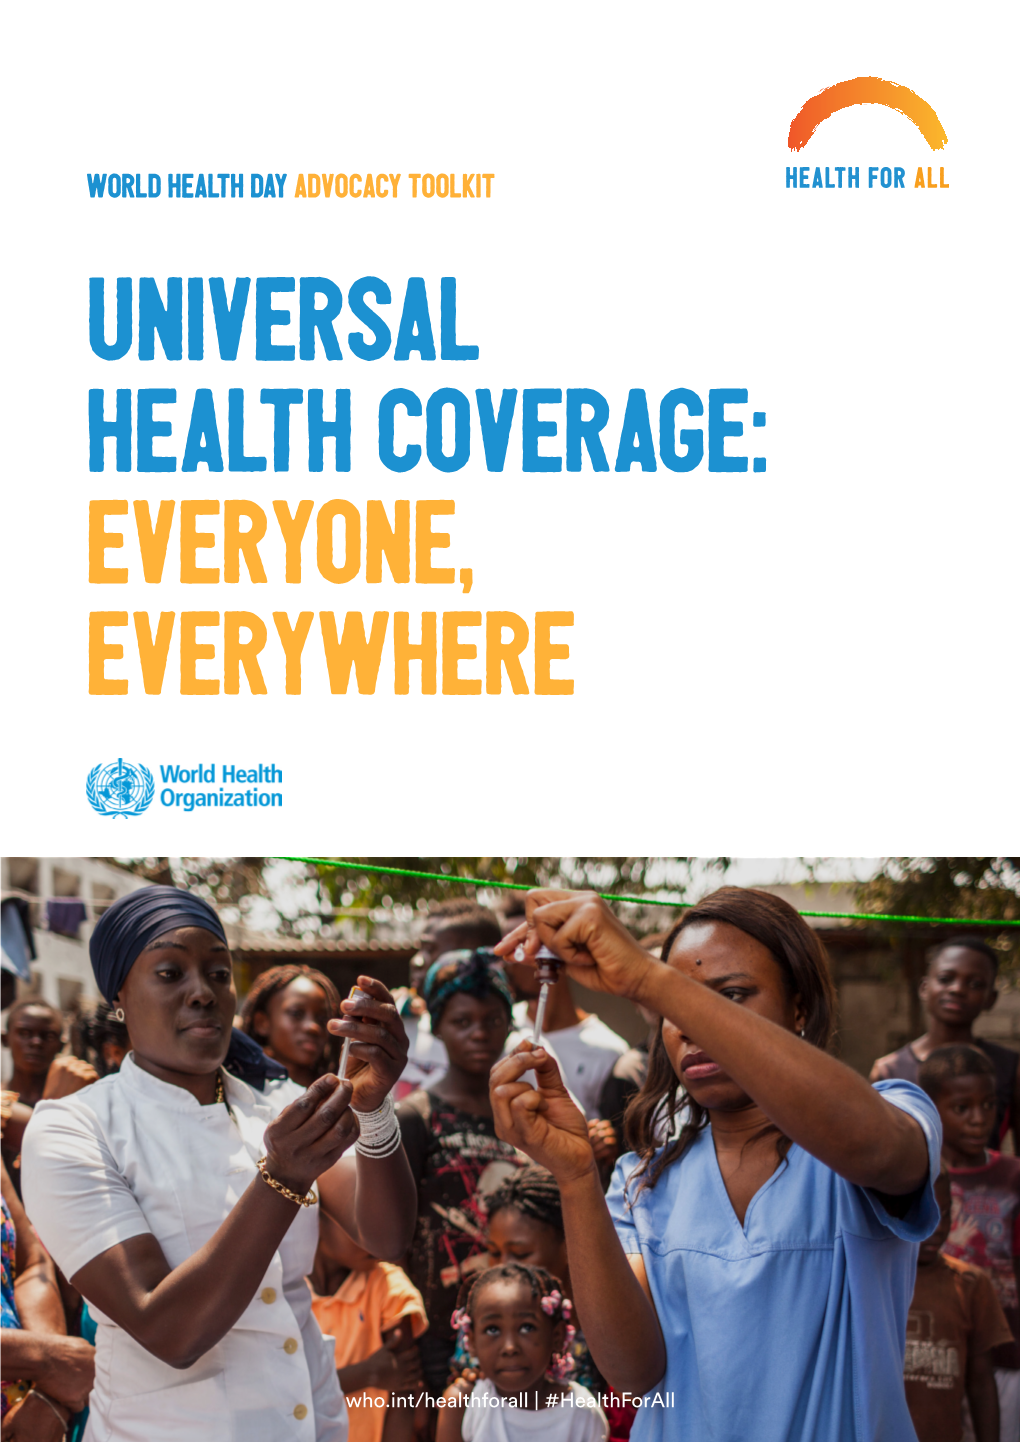 World Health Day Advocacy Toolkit Universal Health Coverage: Everyone, Everywhere